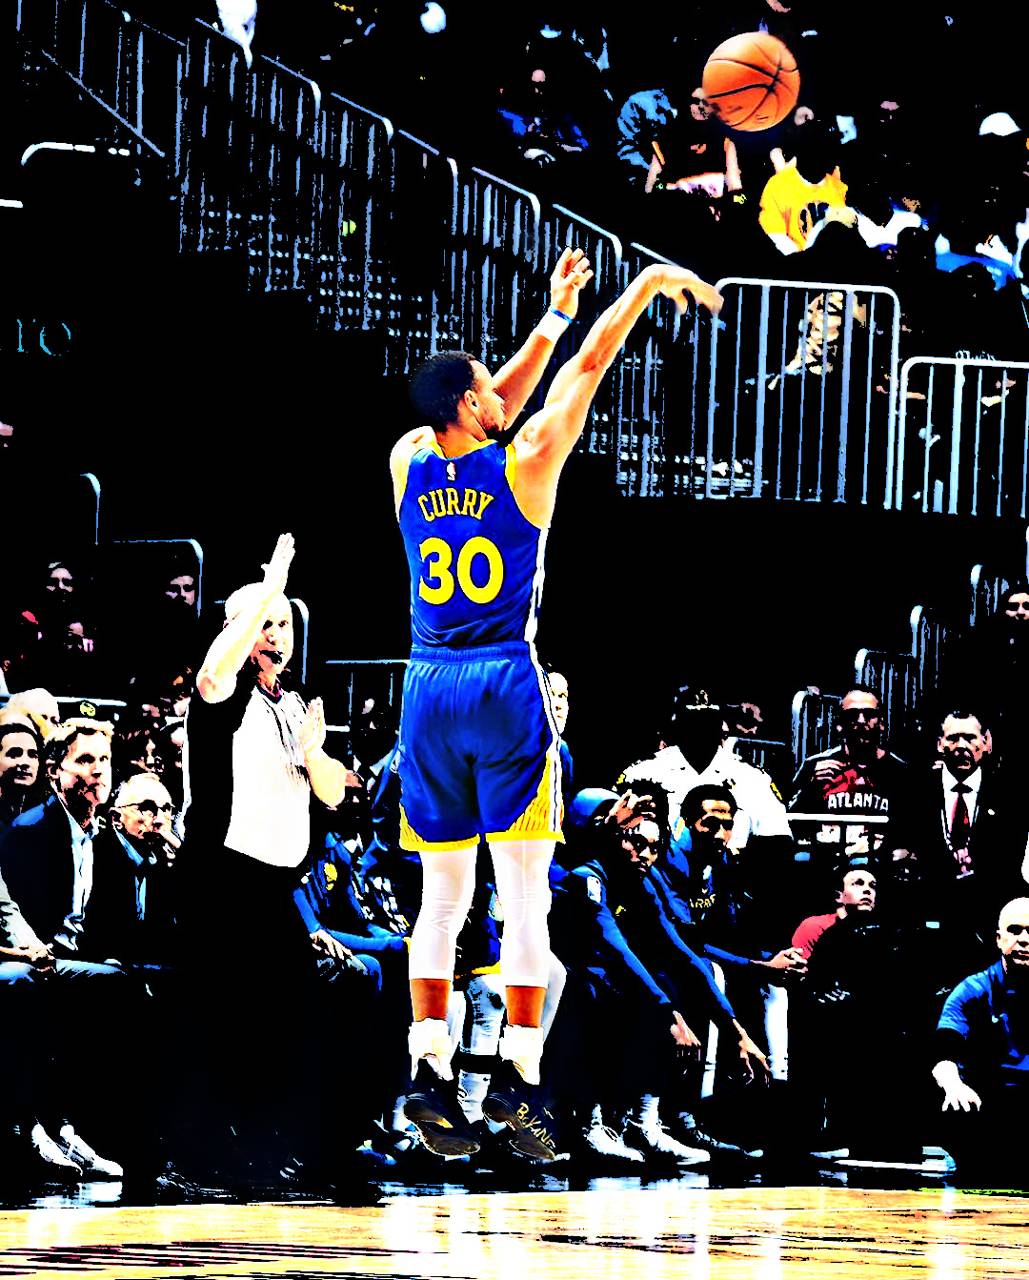 Stephen Curry Dunks Wallpapers On Wallpaperdog